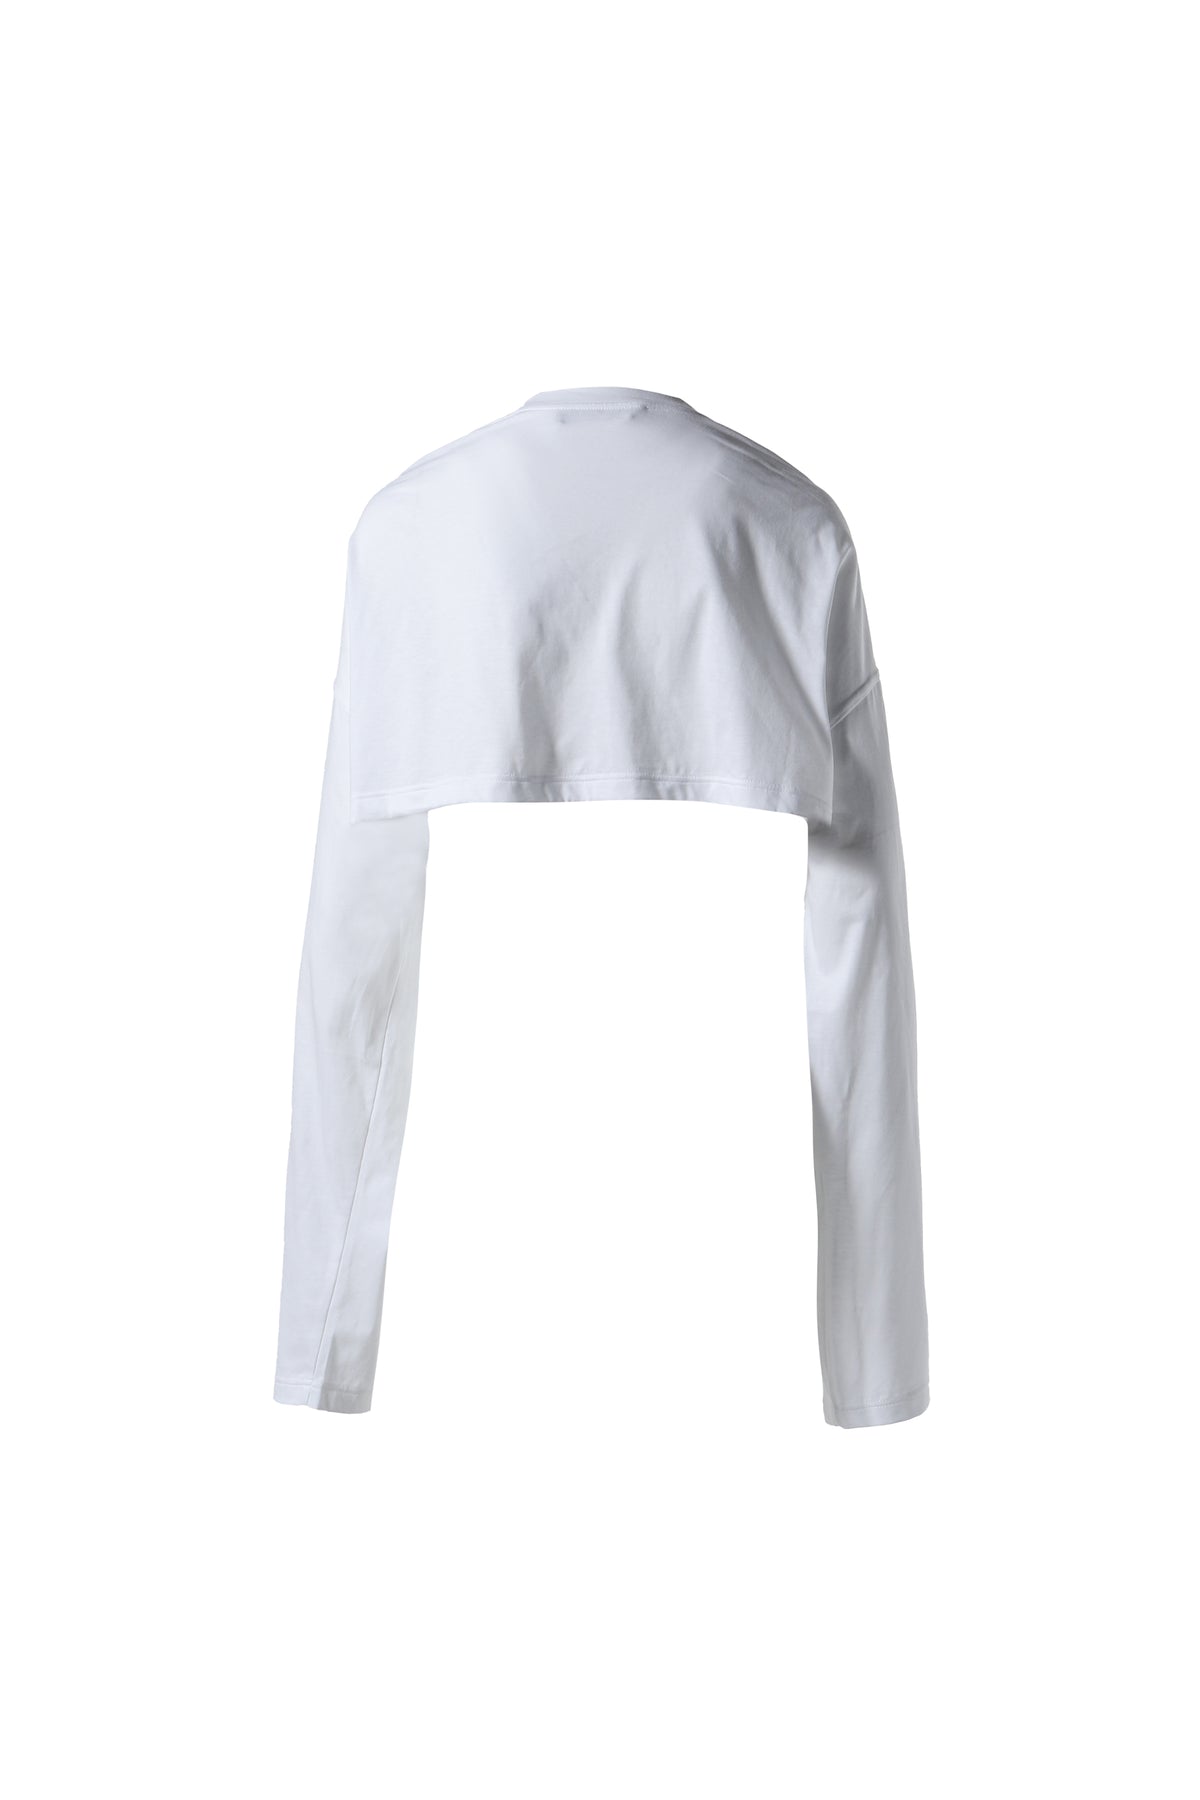 SCRUNCHED LOGO LONG SLEEVE CROP TOP / WHT